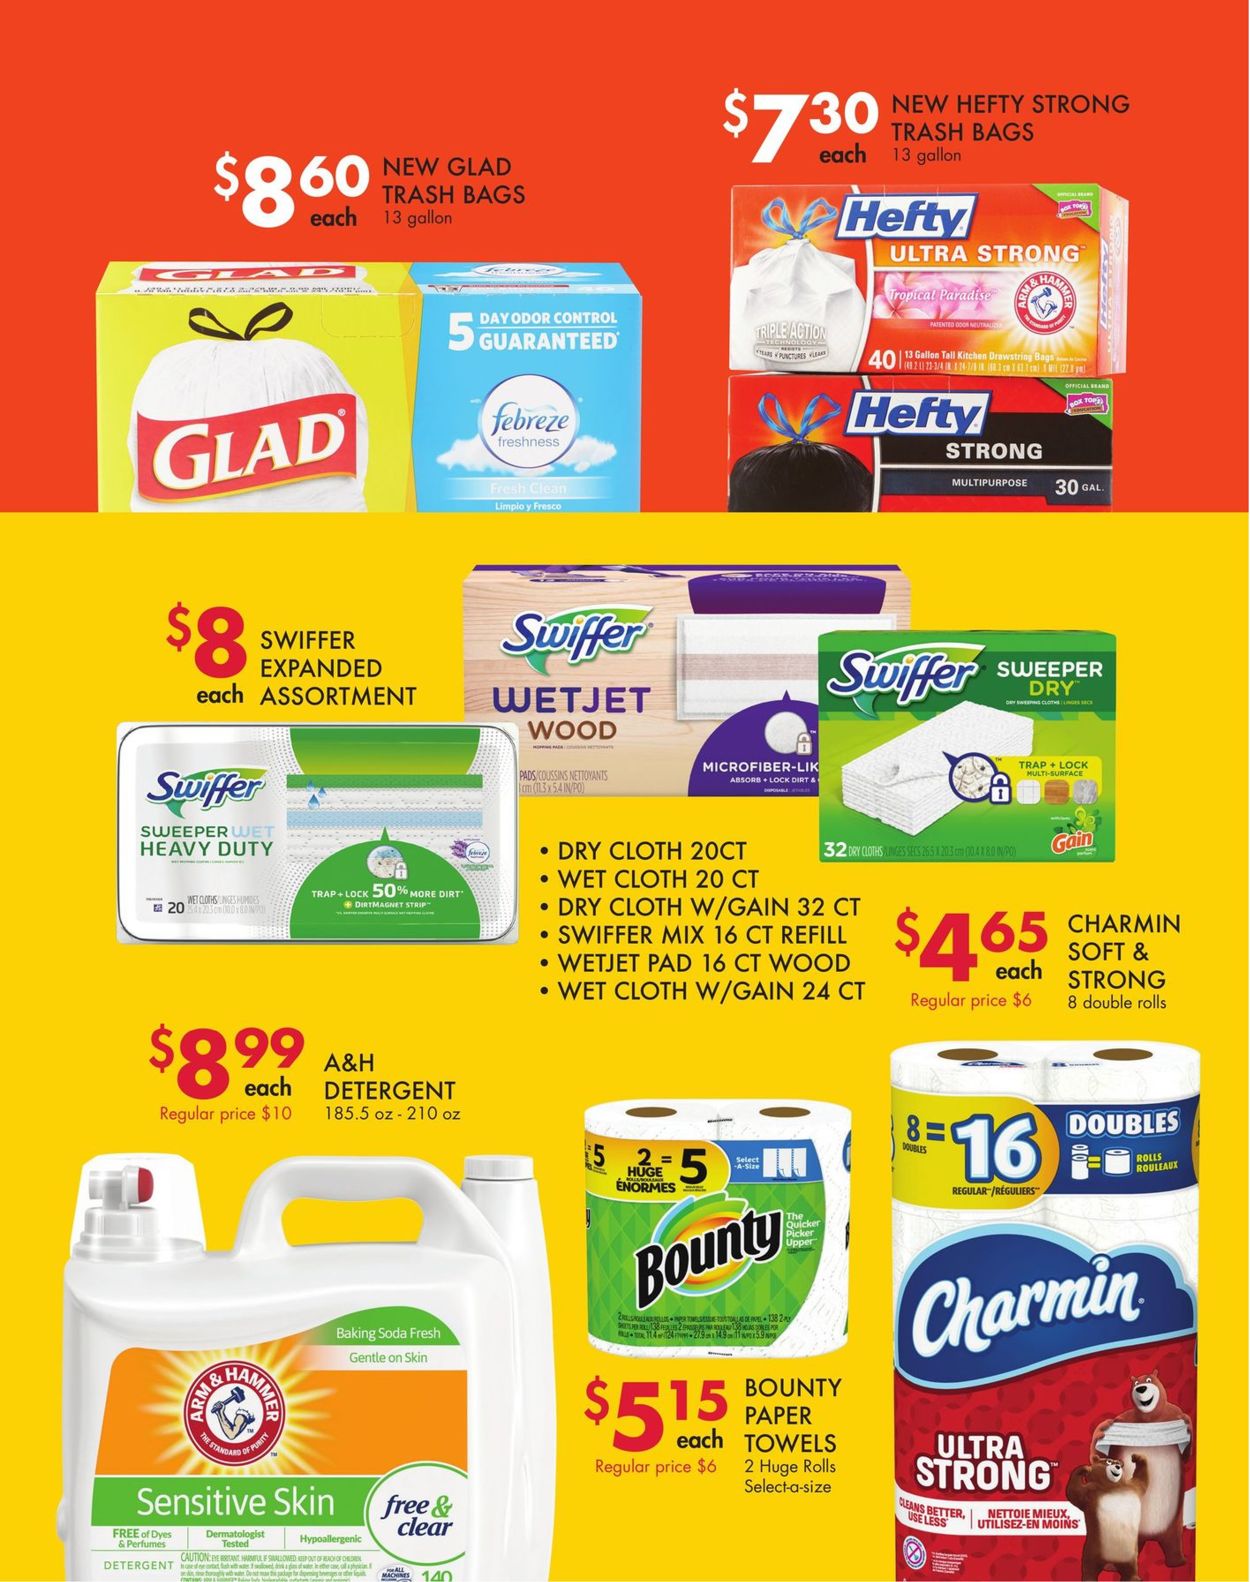 Big Lots Current weekly ad 07/08 - 07/12/2019 [5] - frequent-ads.com